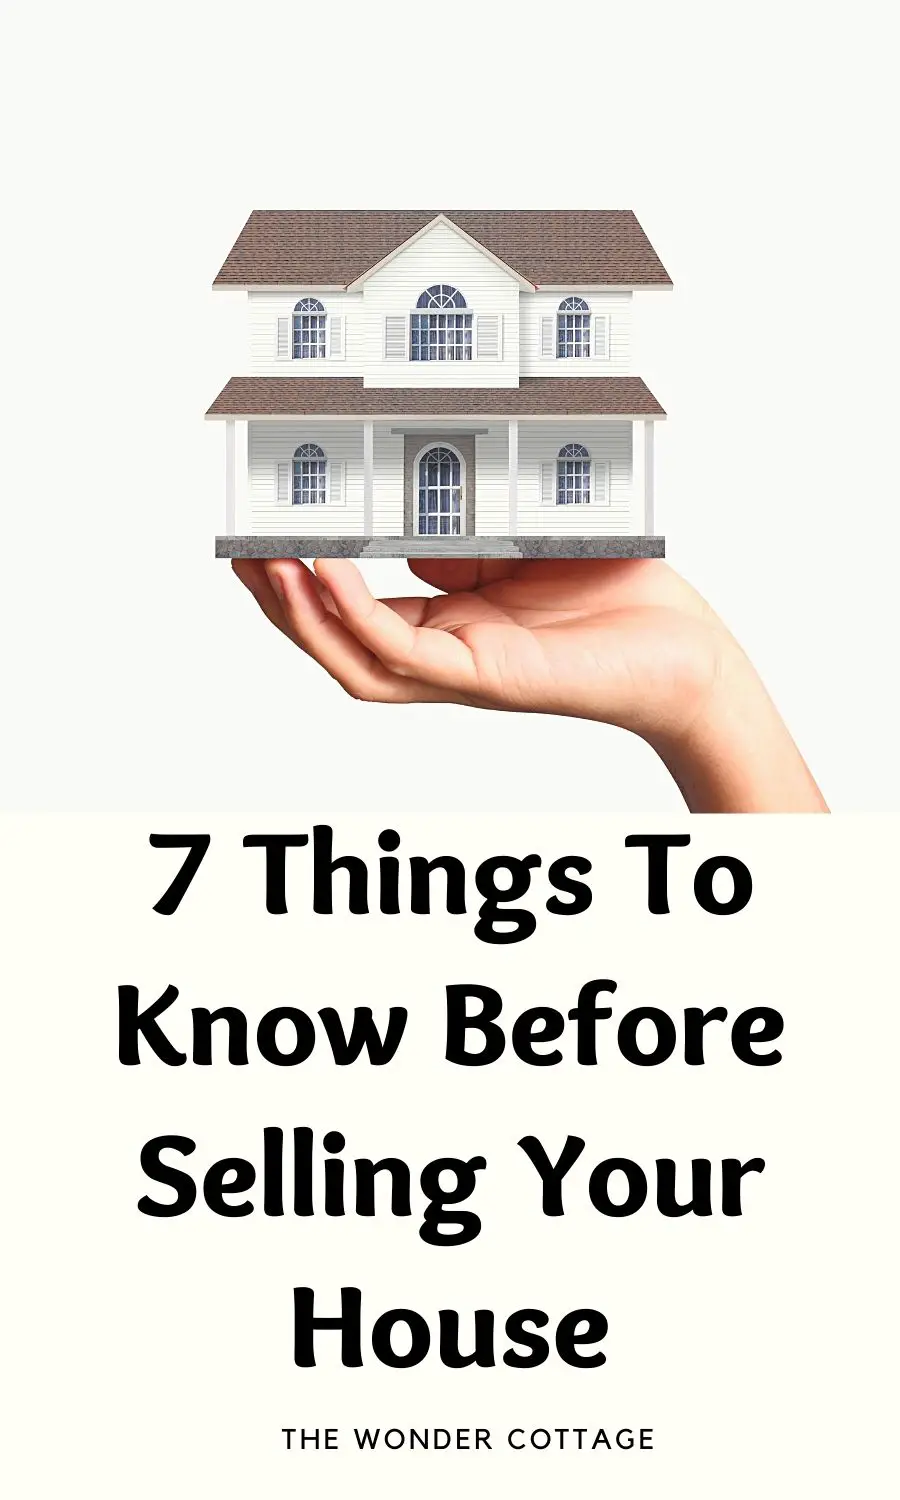 Things to know before selling your house